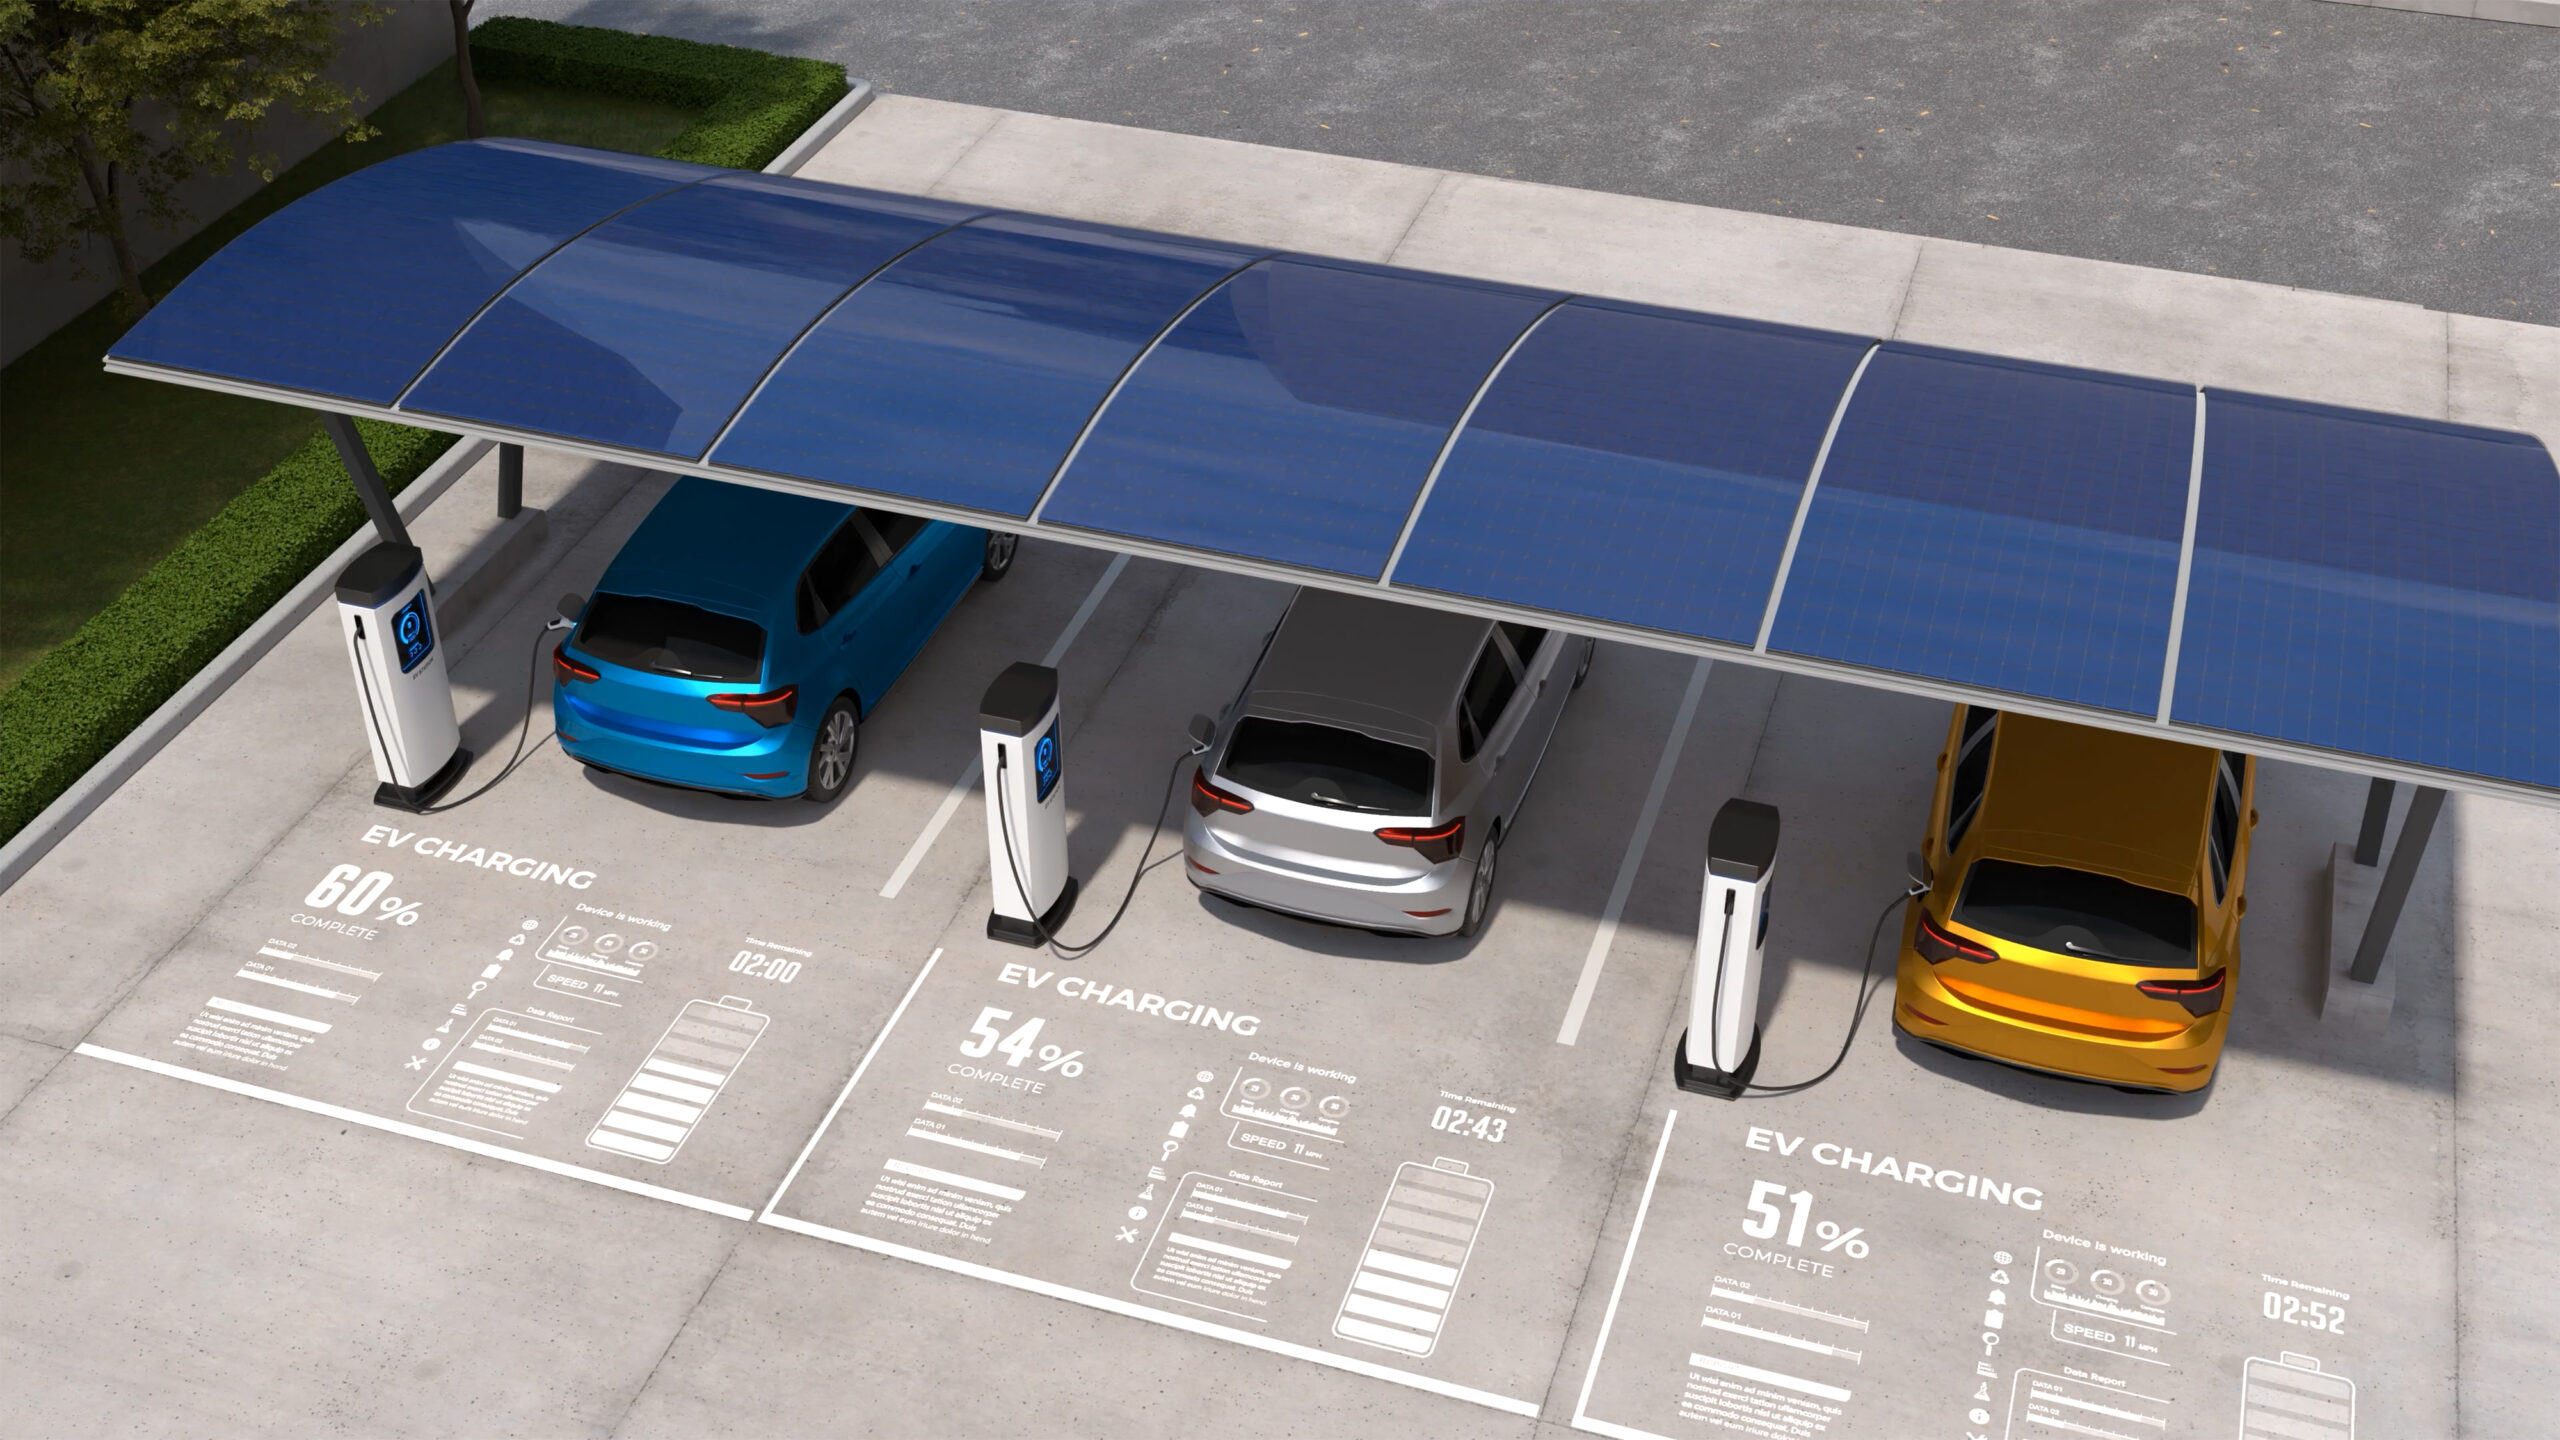 Electric cars are being charged in vehicle parking with solar panel energy